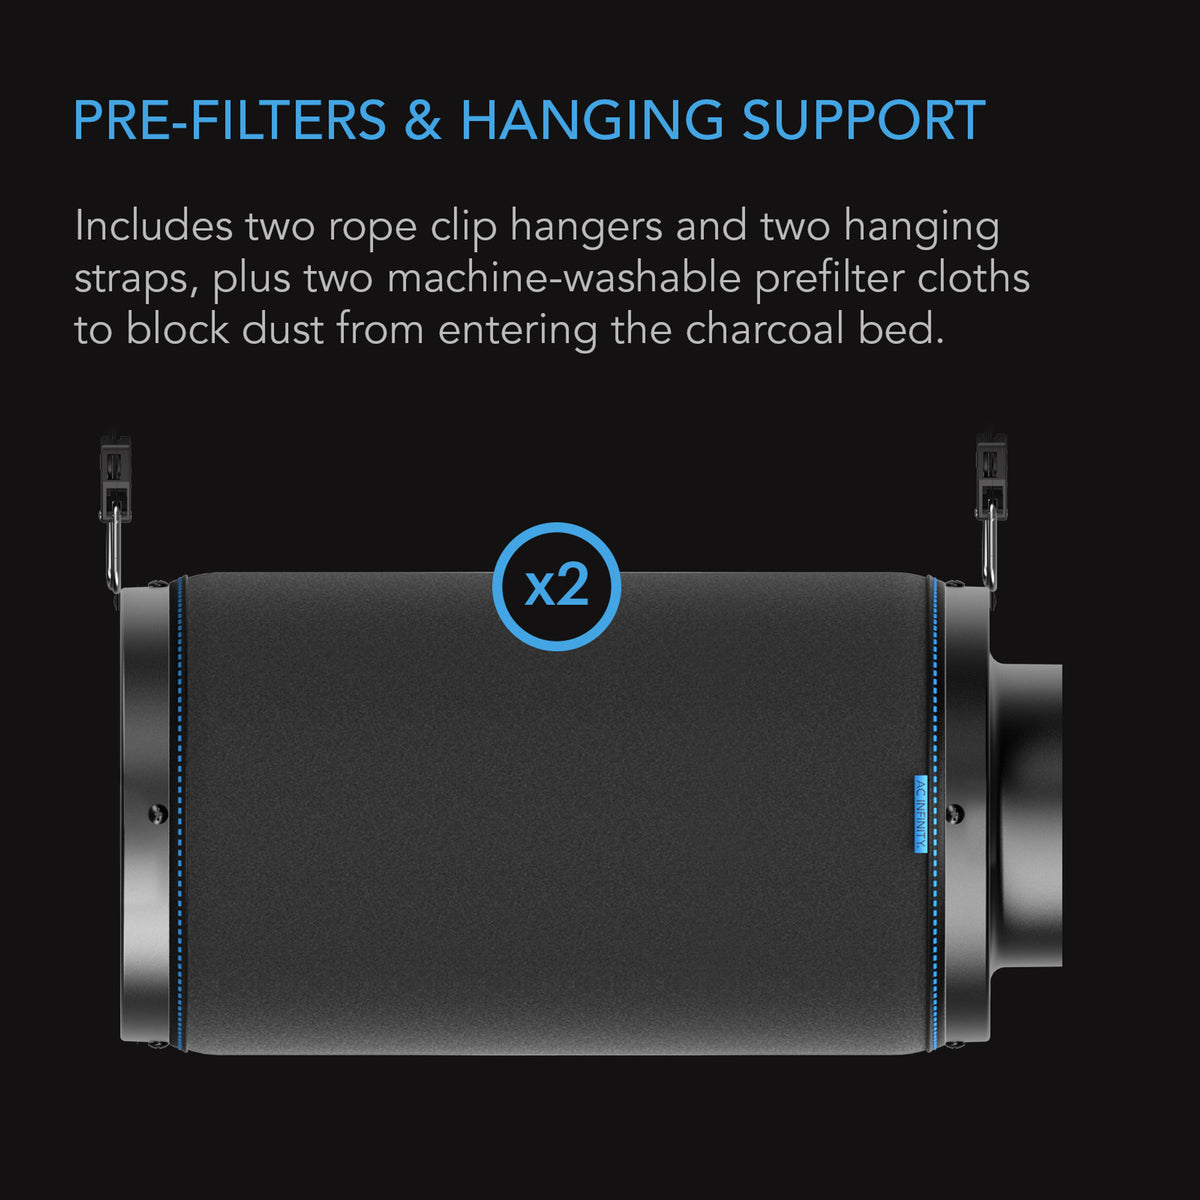 Prefilters and hanging support incl. 